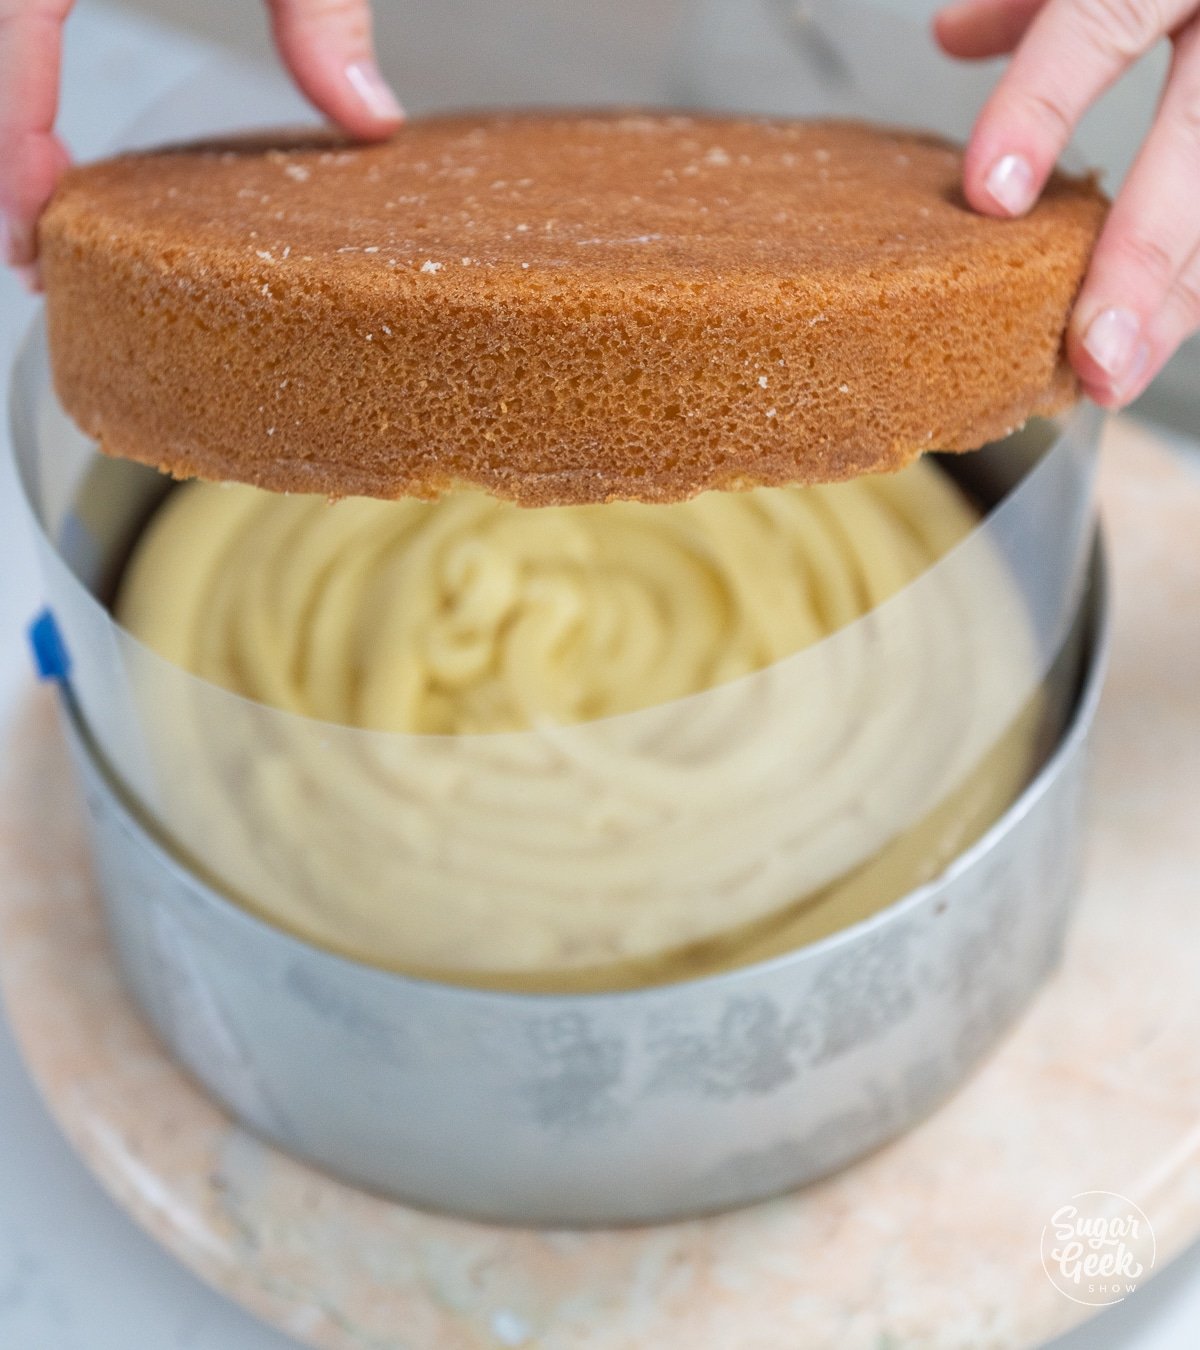 hands adding second cake layer on top of pastry cream filling.